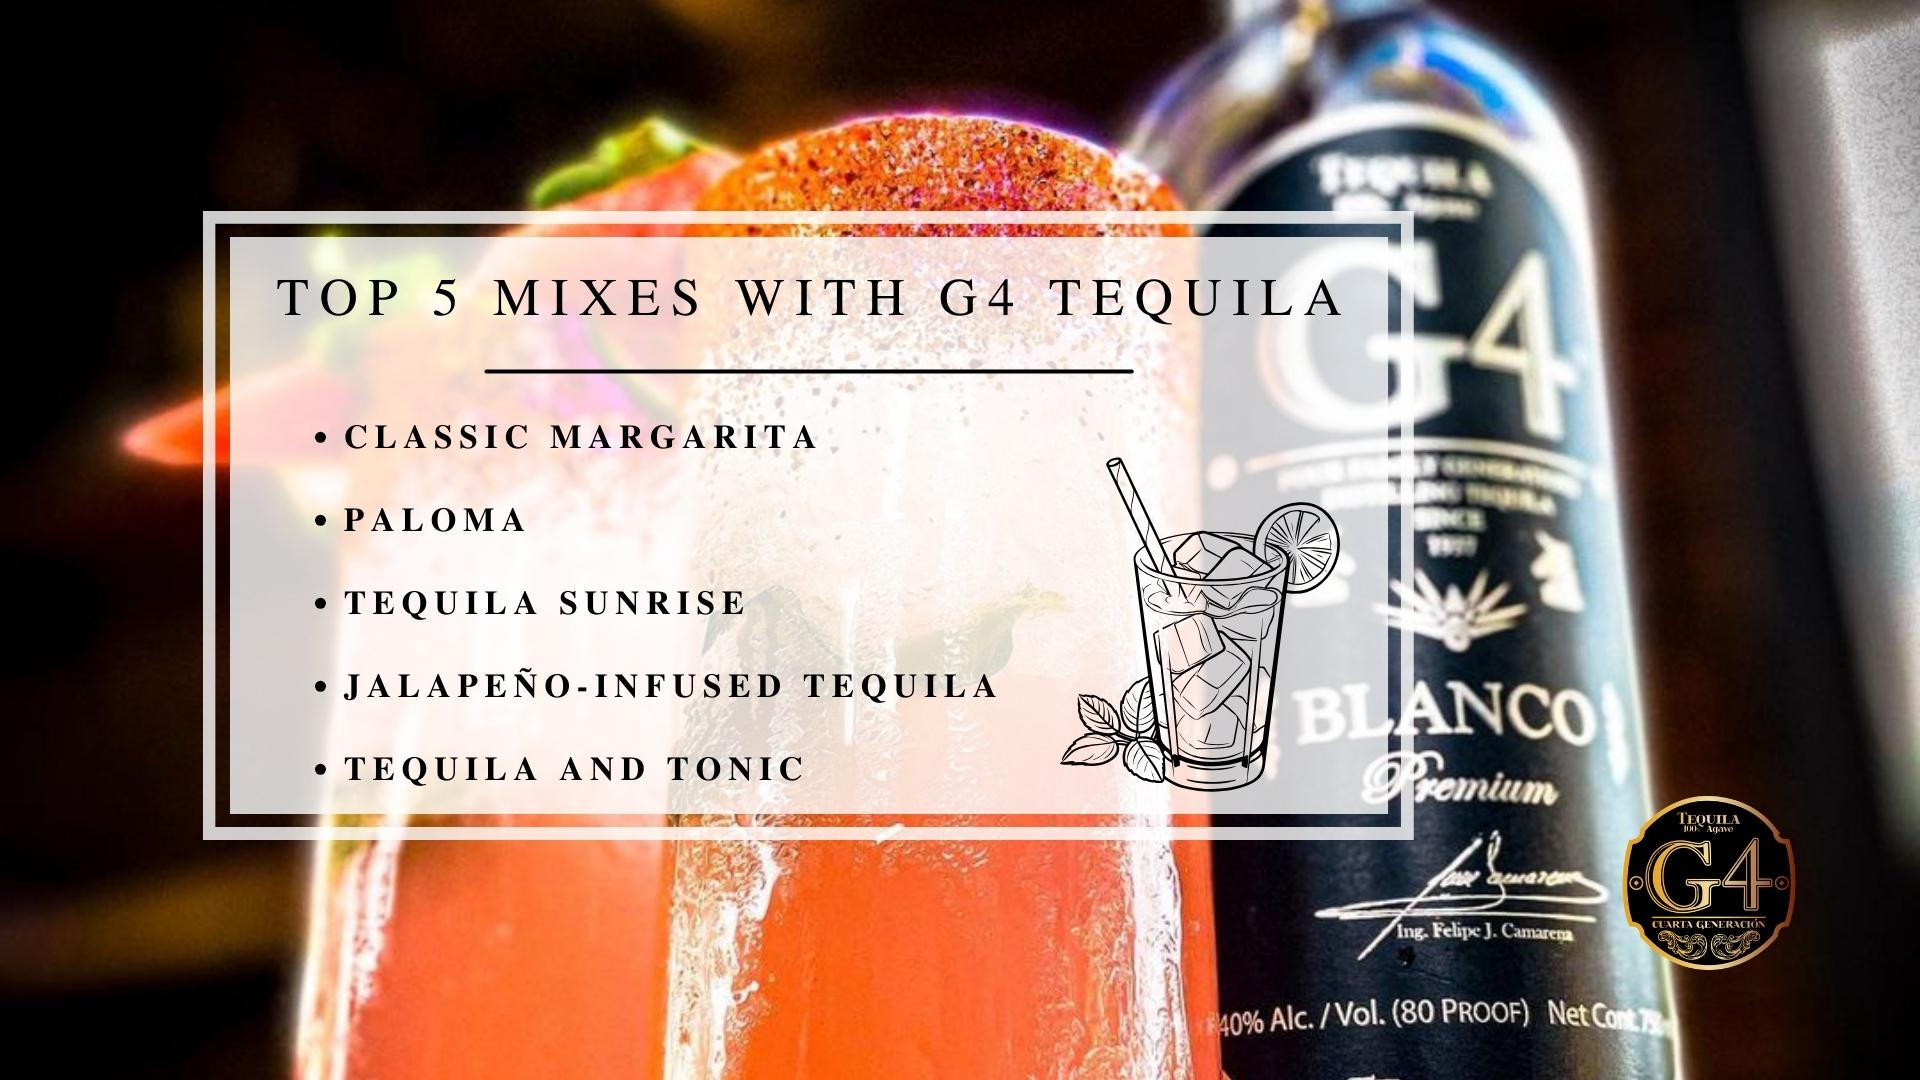 Infographic image of top 5 mixes with g4 tequila